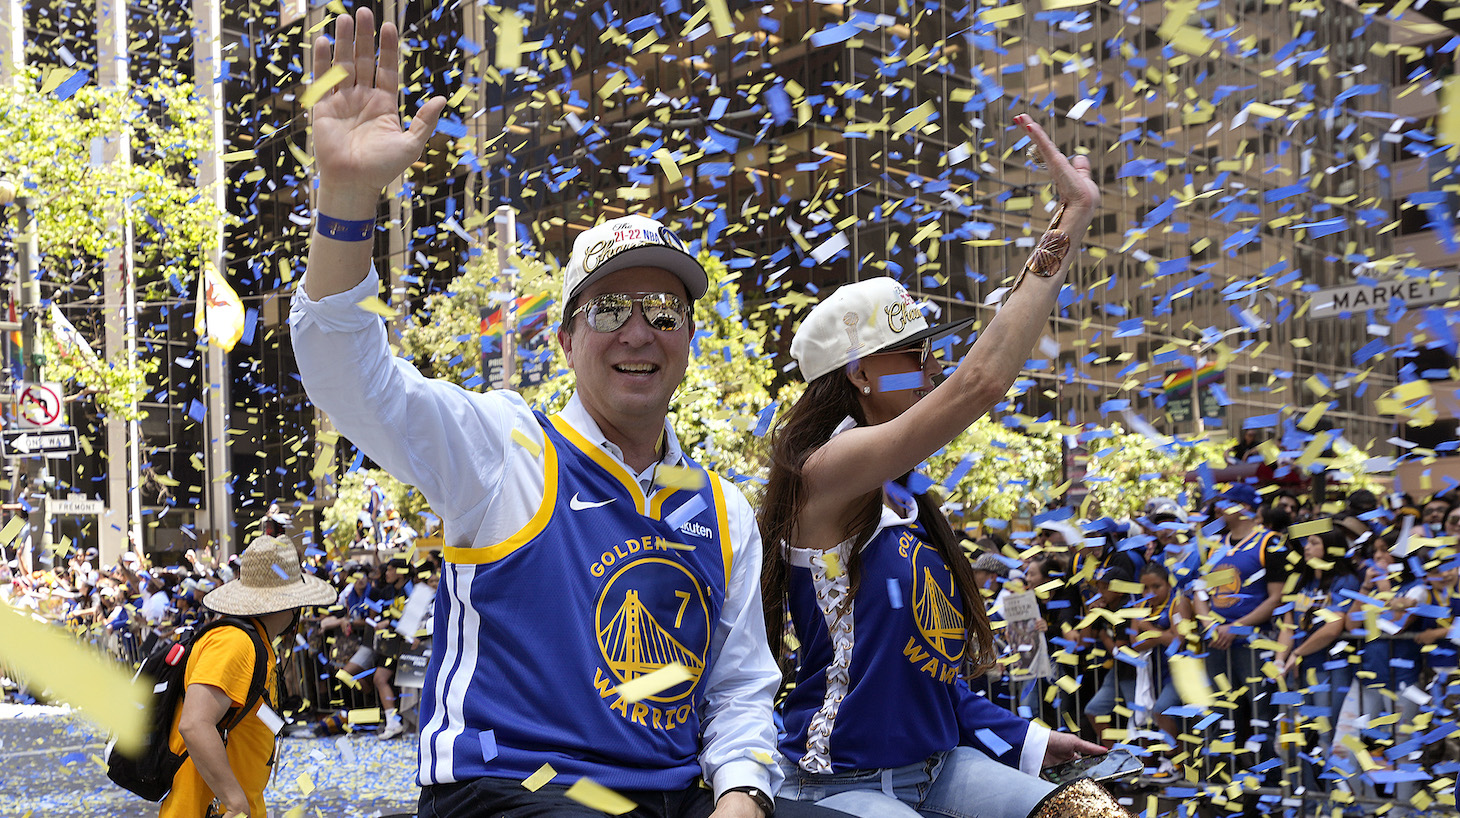 Owner Joe Lacob of the Golden State Warriors waves to fans during the Golden State Warriors Victory Parade on June 20, 2022 in San Francisco, California. The Golden State Warriors beat the Boston Celtics 4-2 to win the 2022 NBA Finals.